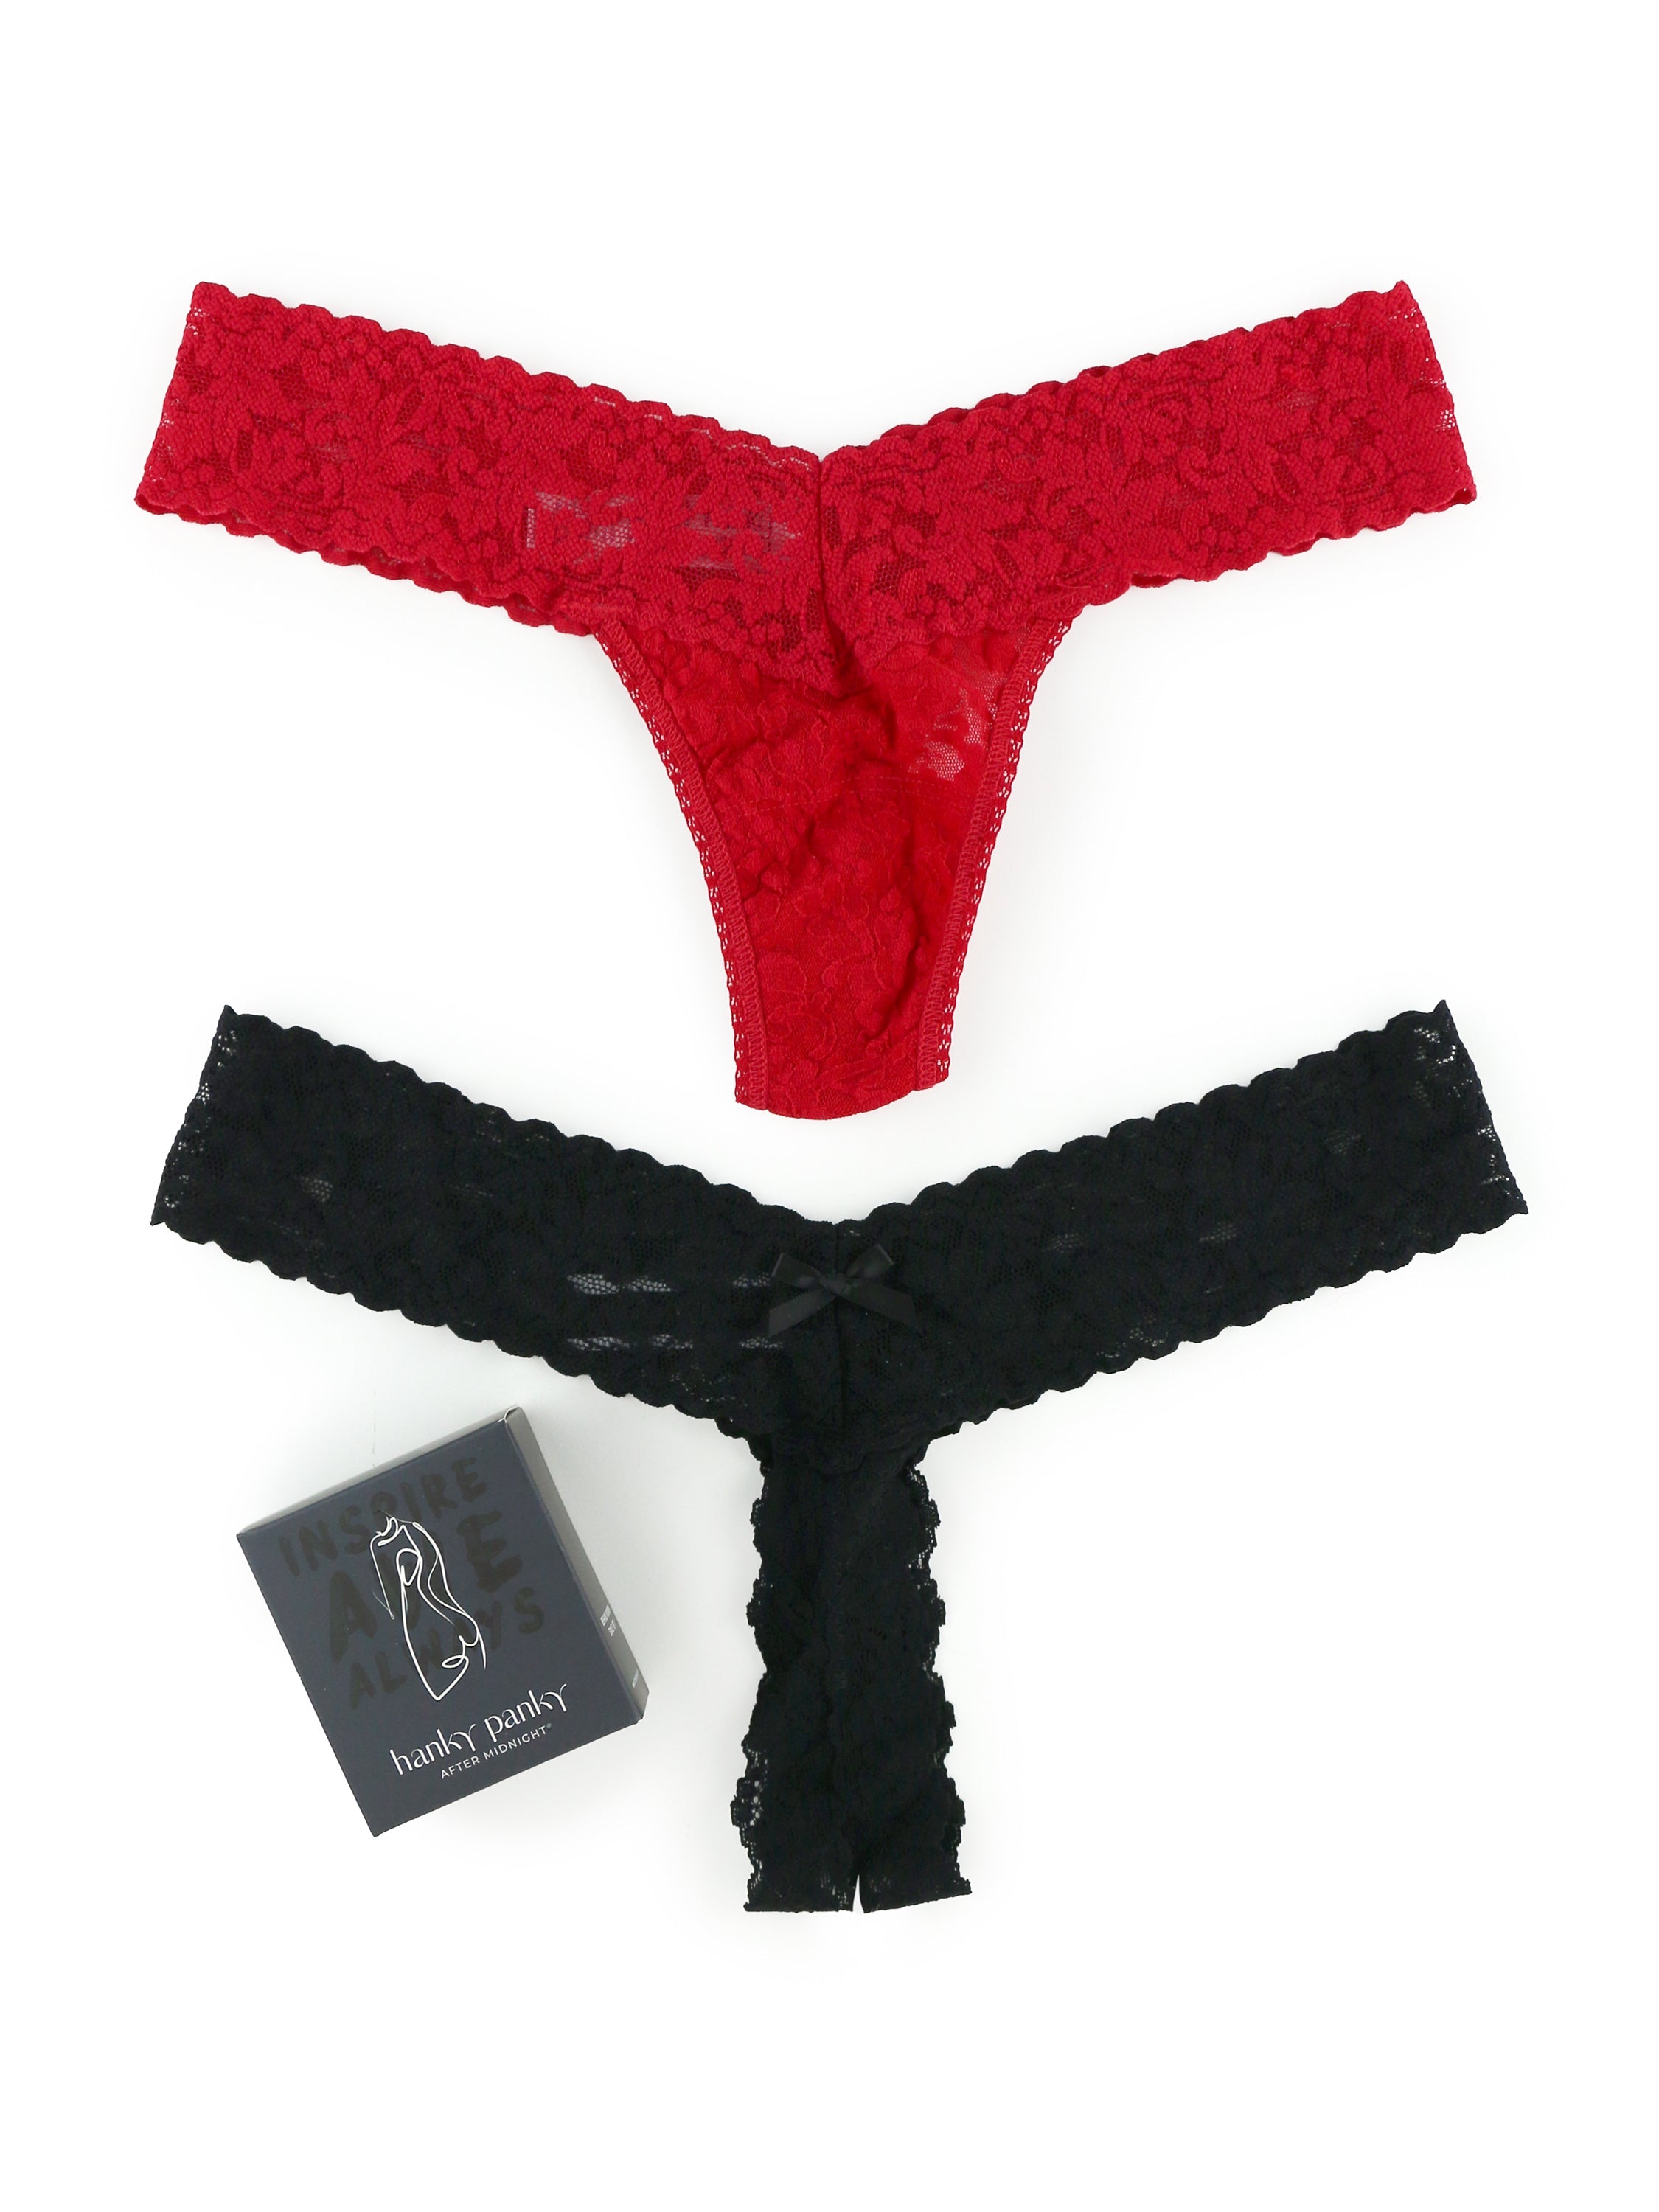 Pack of 3, Satin & Black Lace Thong Ladies Lingerie Red, Blue